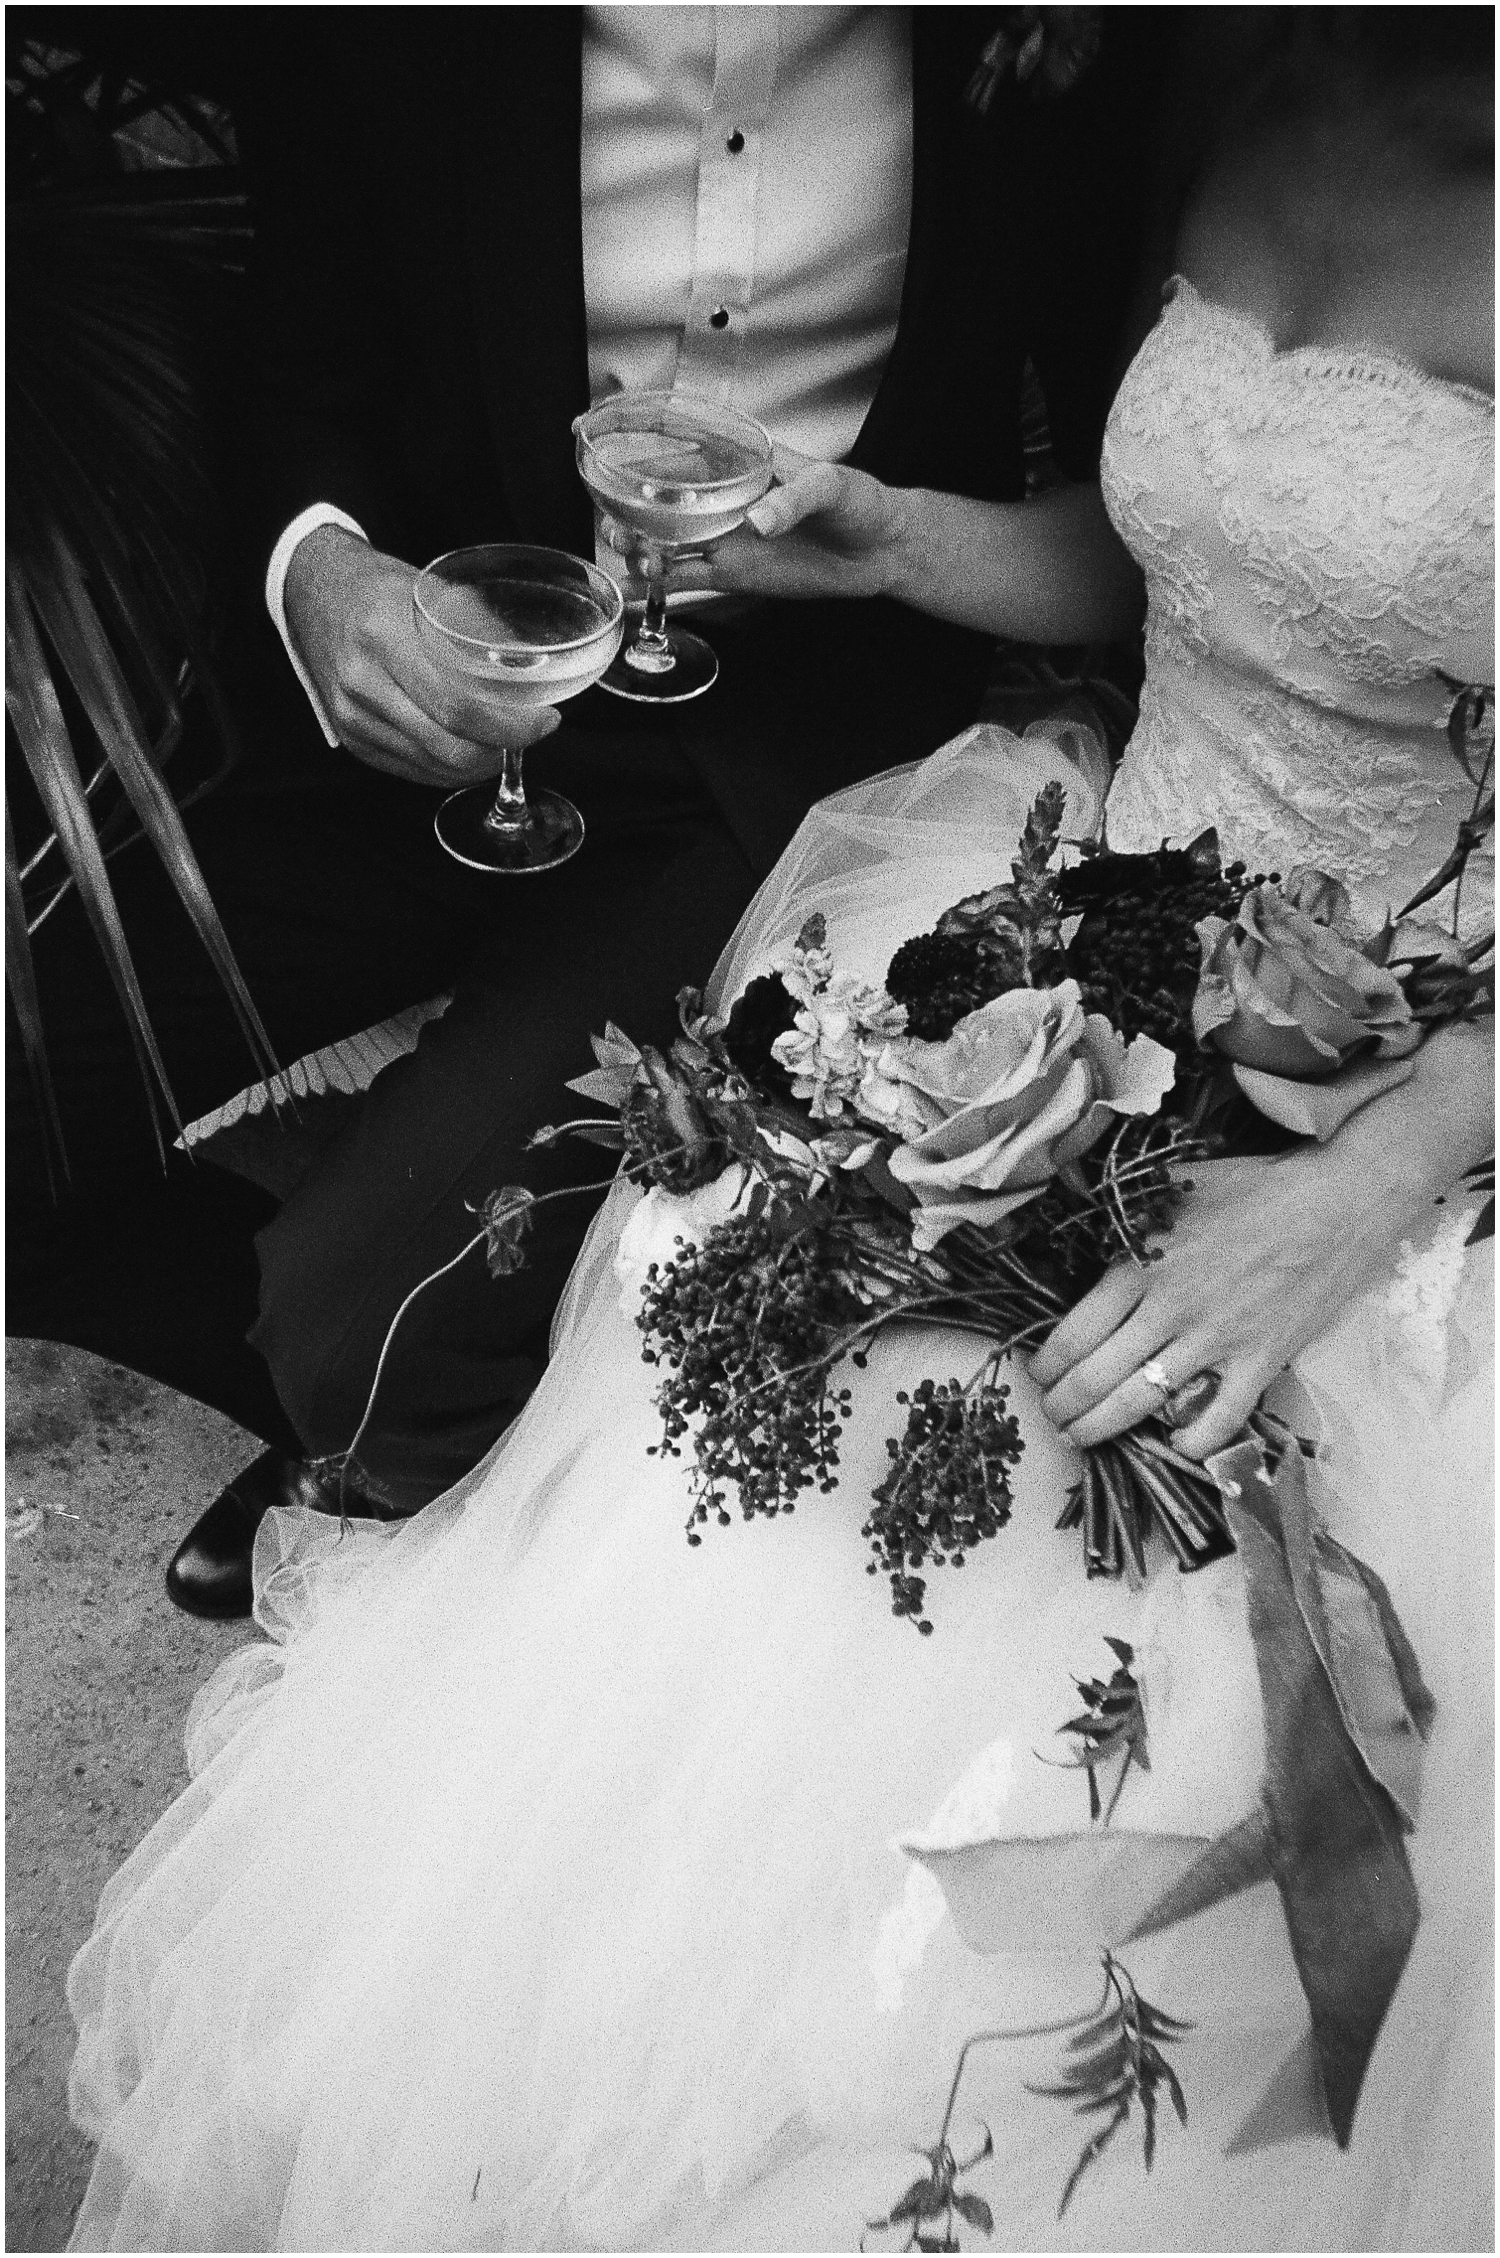 A bride hands a groom a cocktail in a black and white image taken on disposable cameras for weddings.